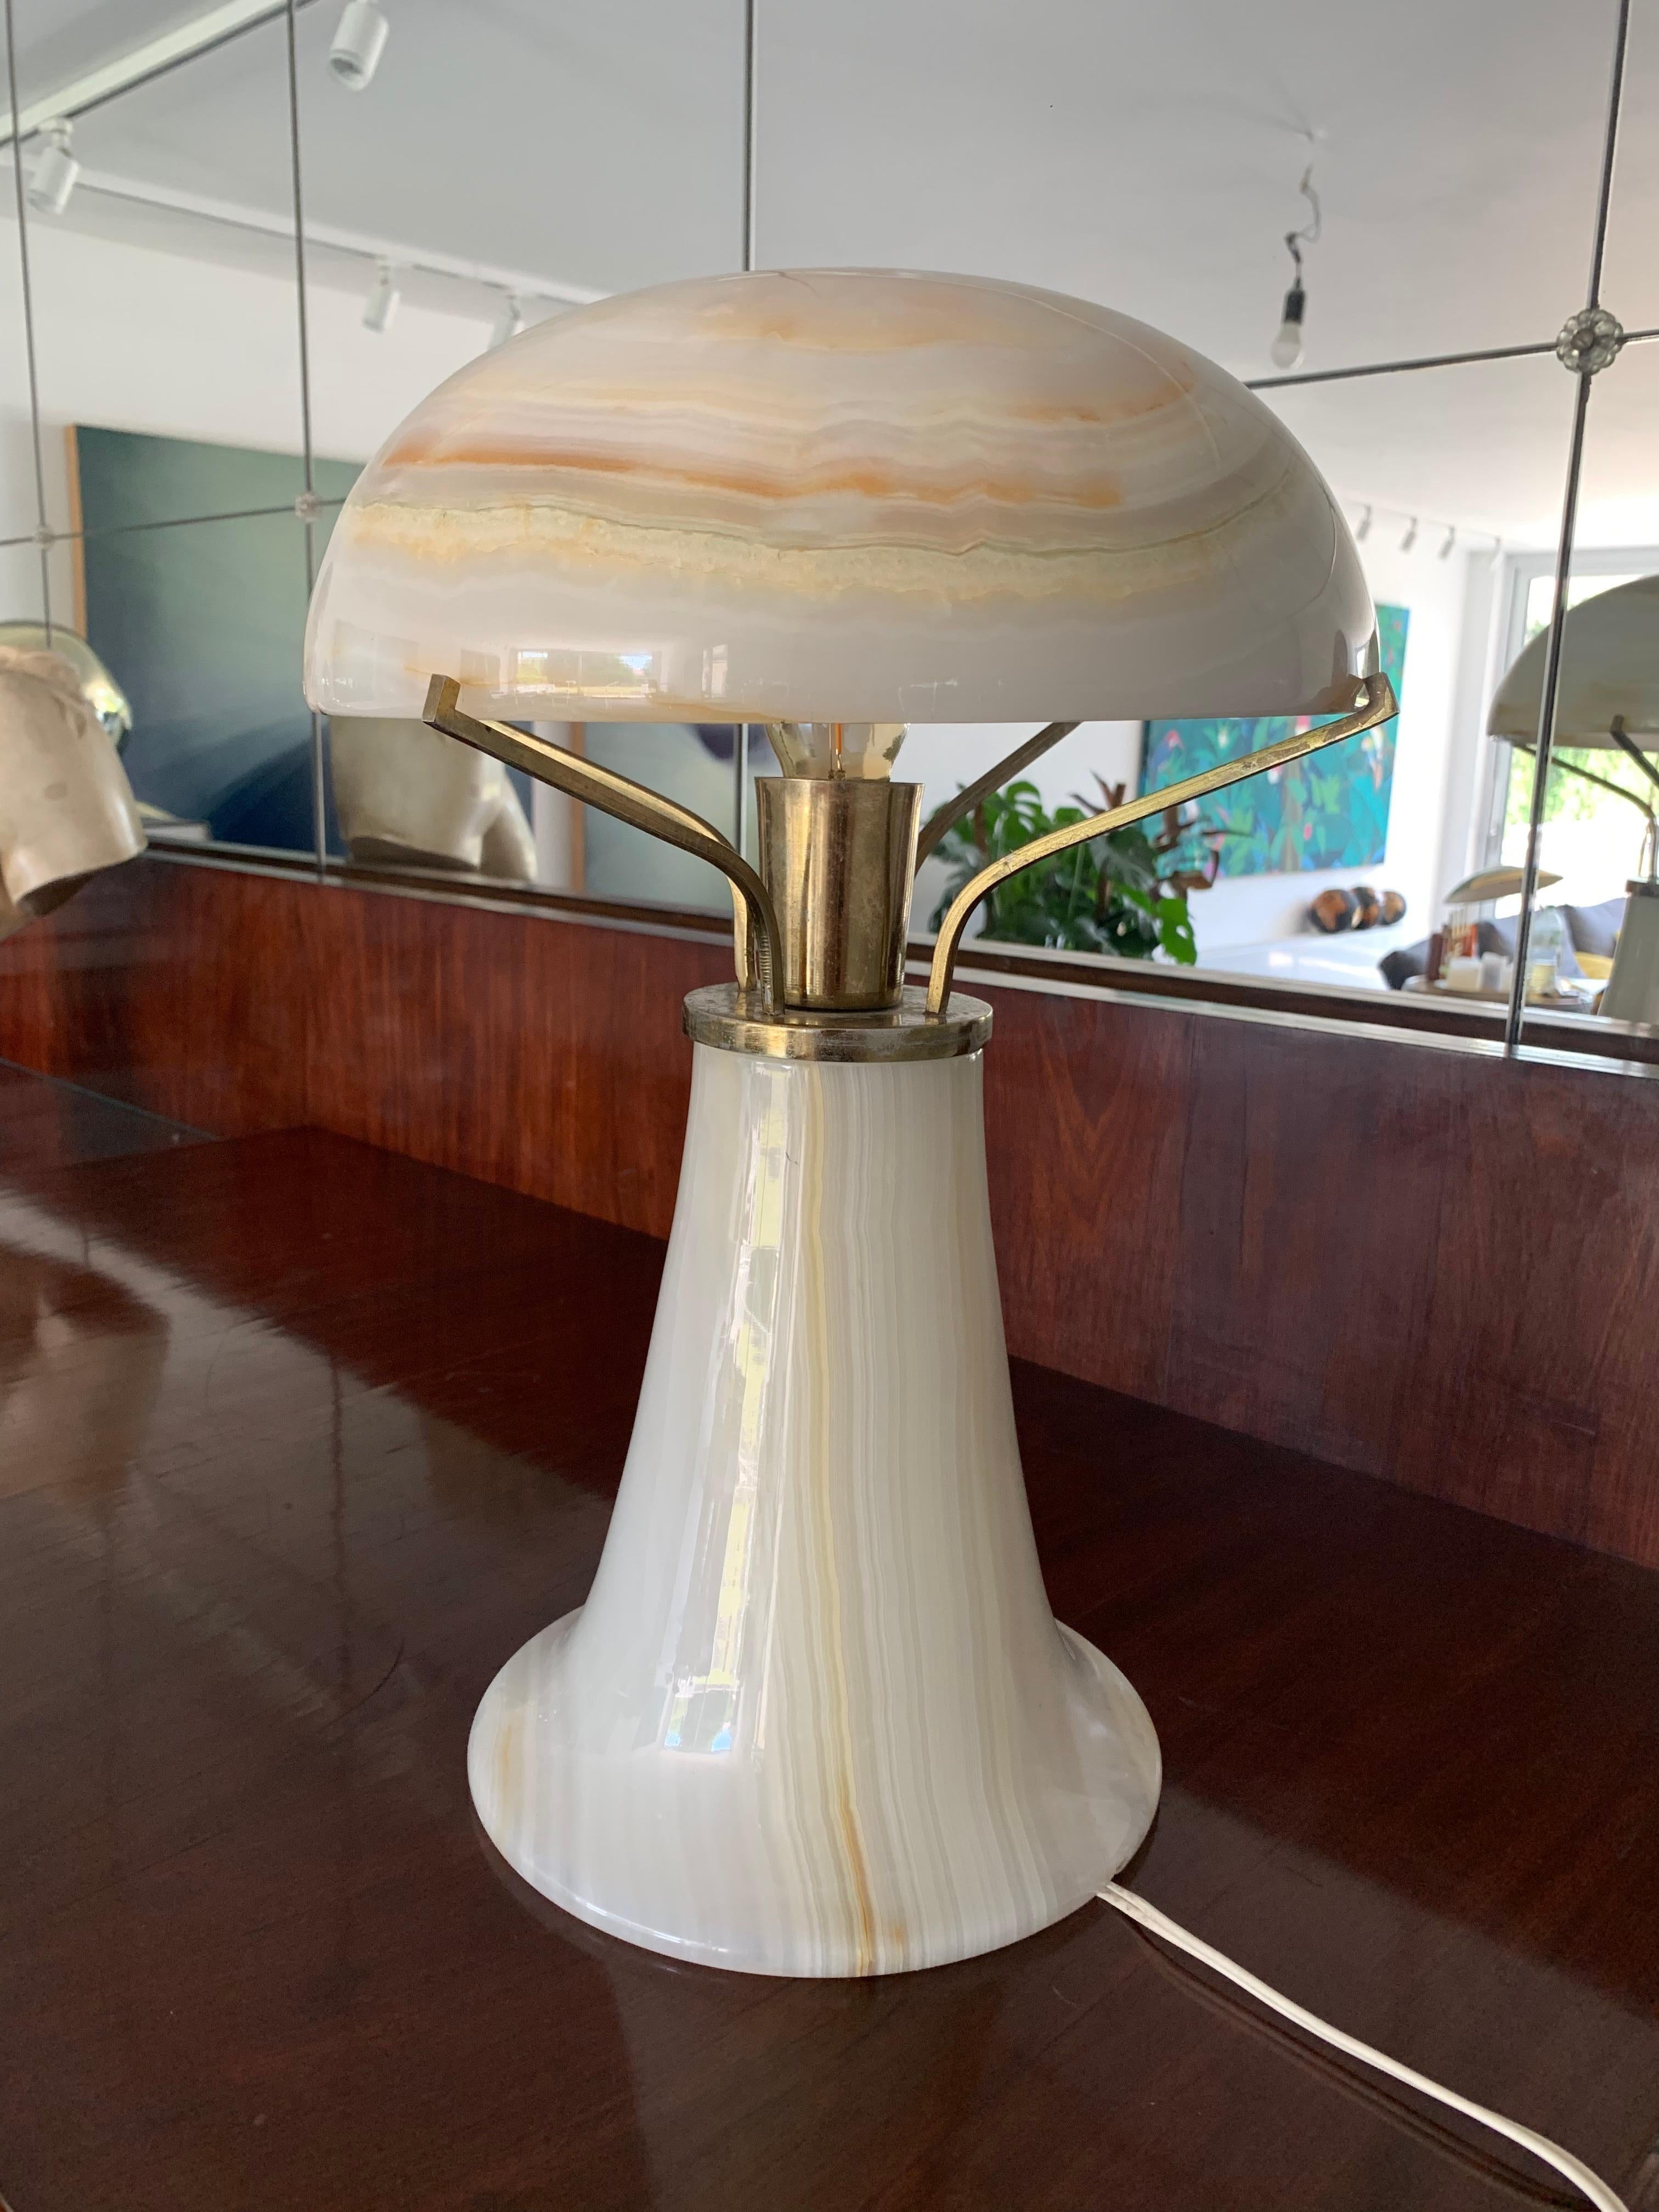 This is an original Art Deco table light that gives off soft light.
It’s made entirely out of onyx - when the light is turned on it shines softly through the stone,
Creating a beautiful lighting effect.